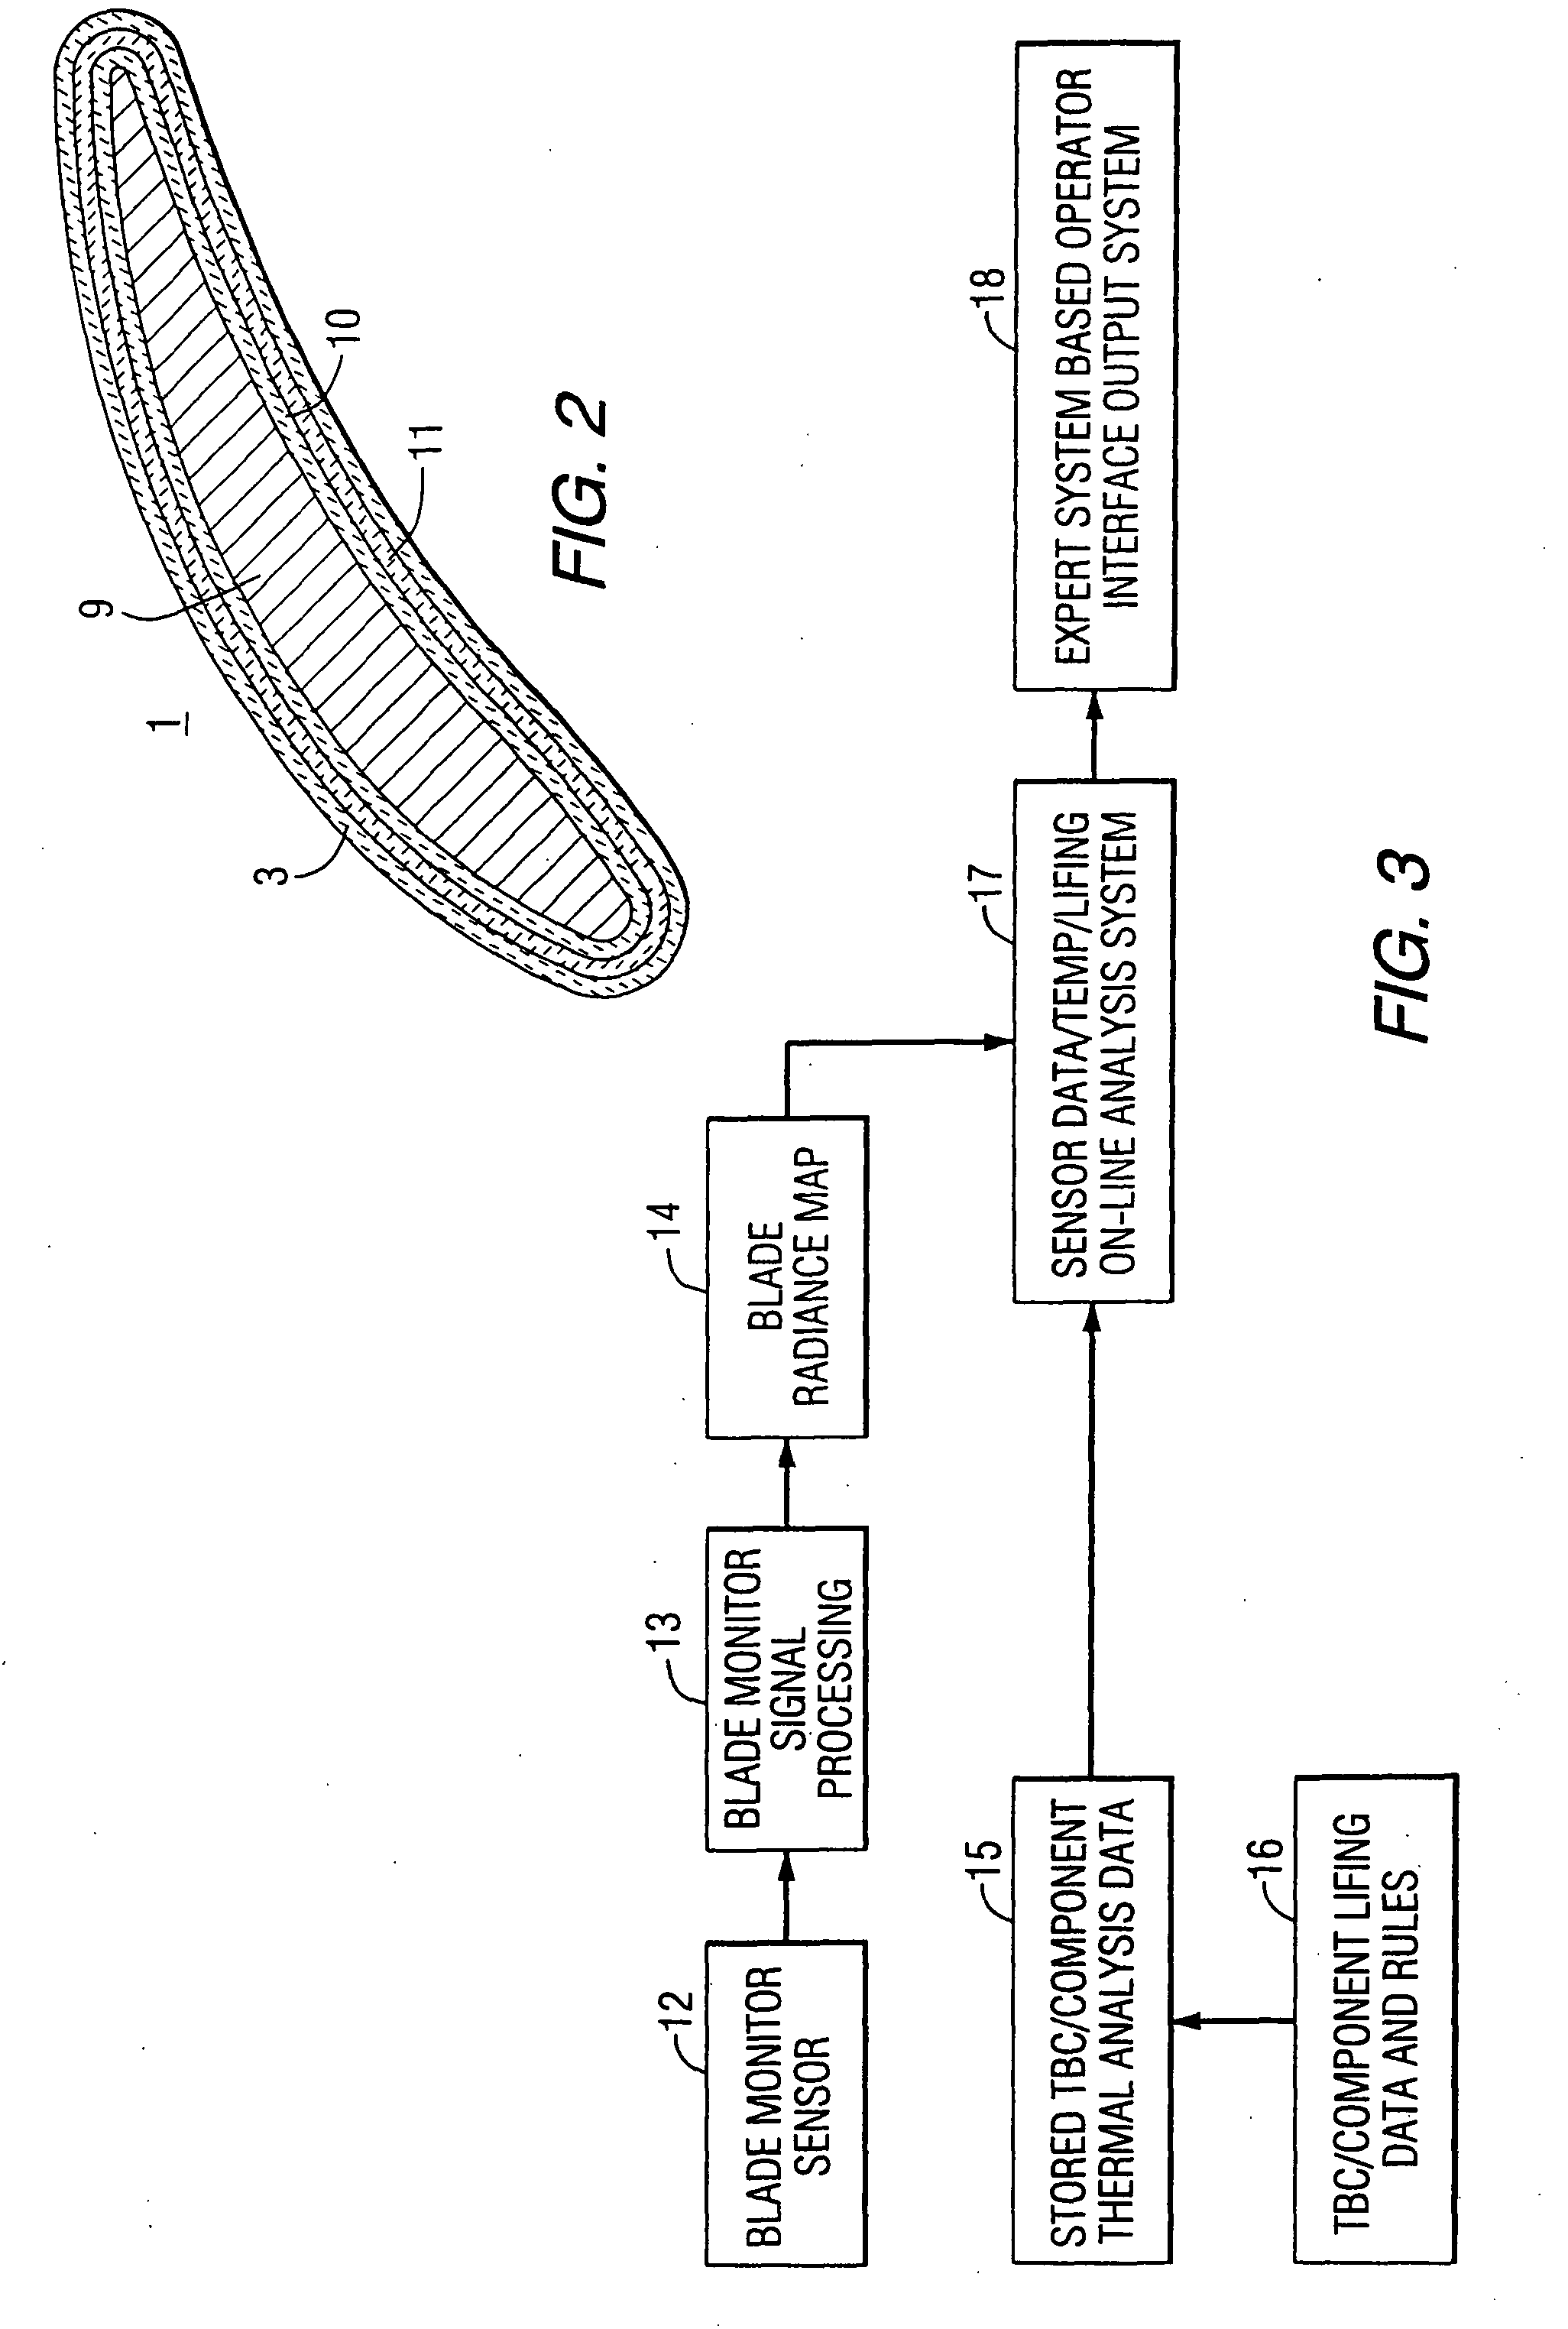 Method and apparatus for measuring on-line failure of turbine thermal barrier coatings